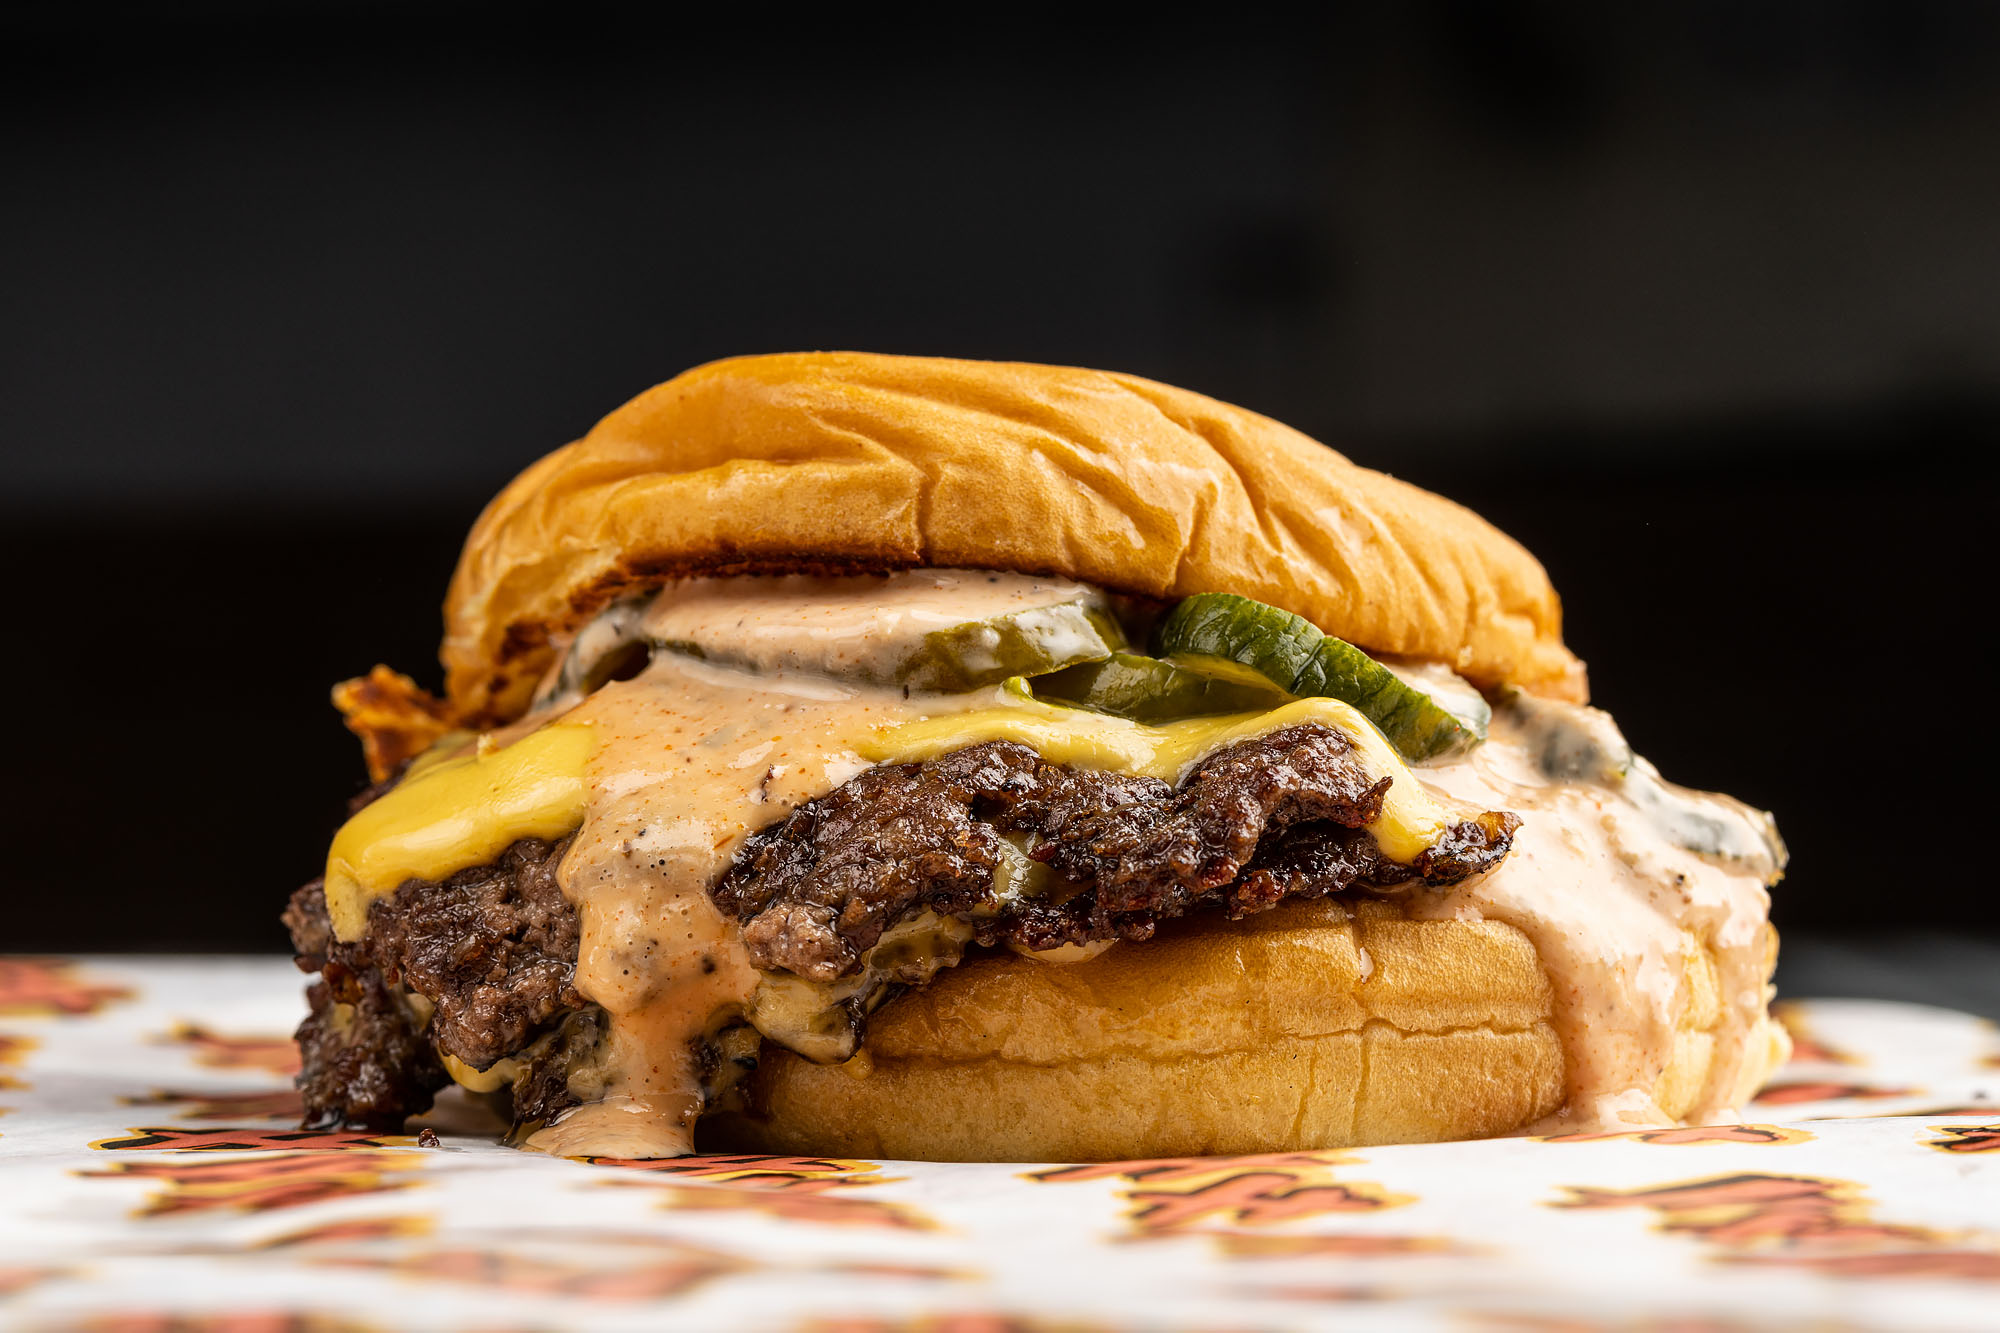 A cheeseburger topped with pickles, sauce, and caramelized onions from Heavy Handed in Santa Monica, California.